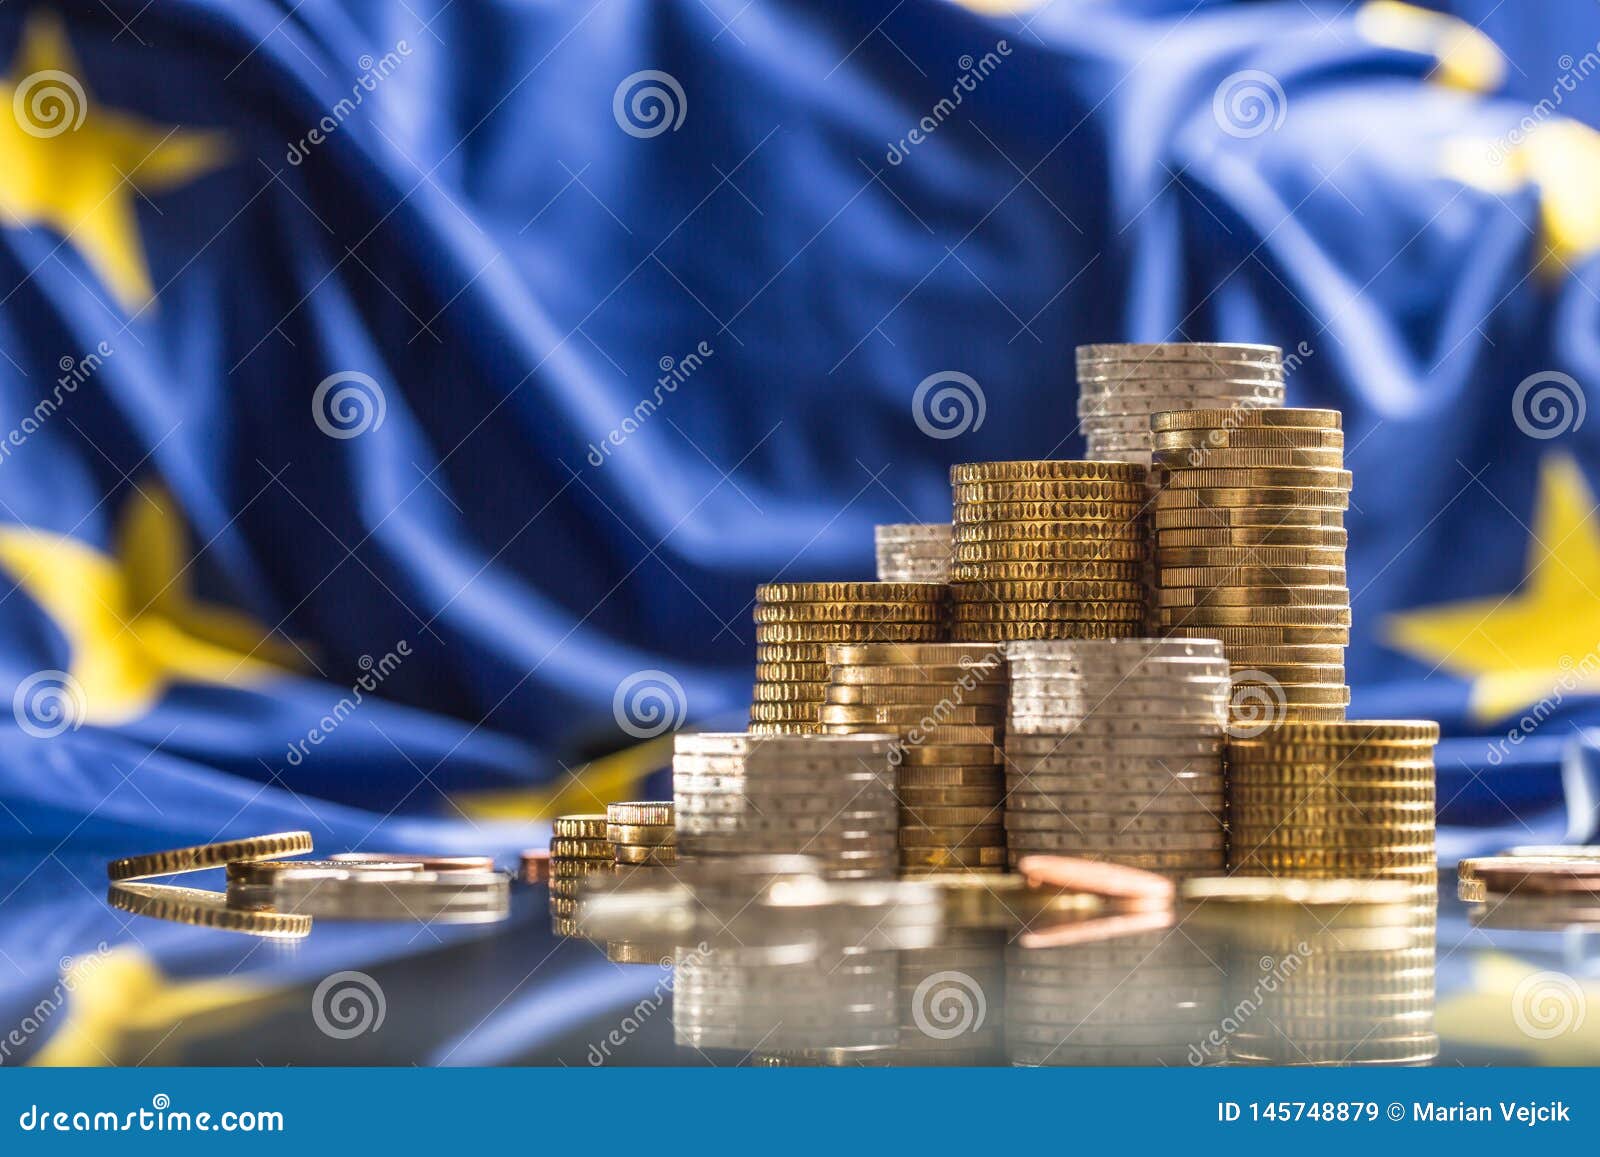 towers with euro coins and flag of european union in the background